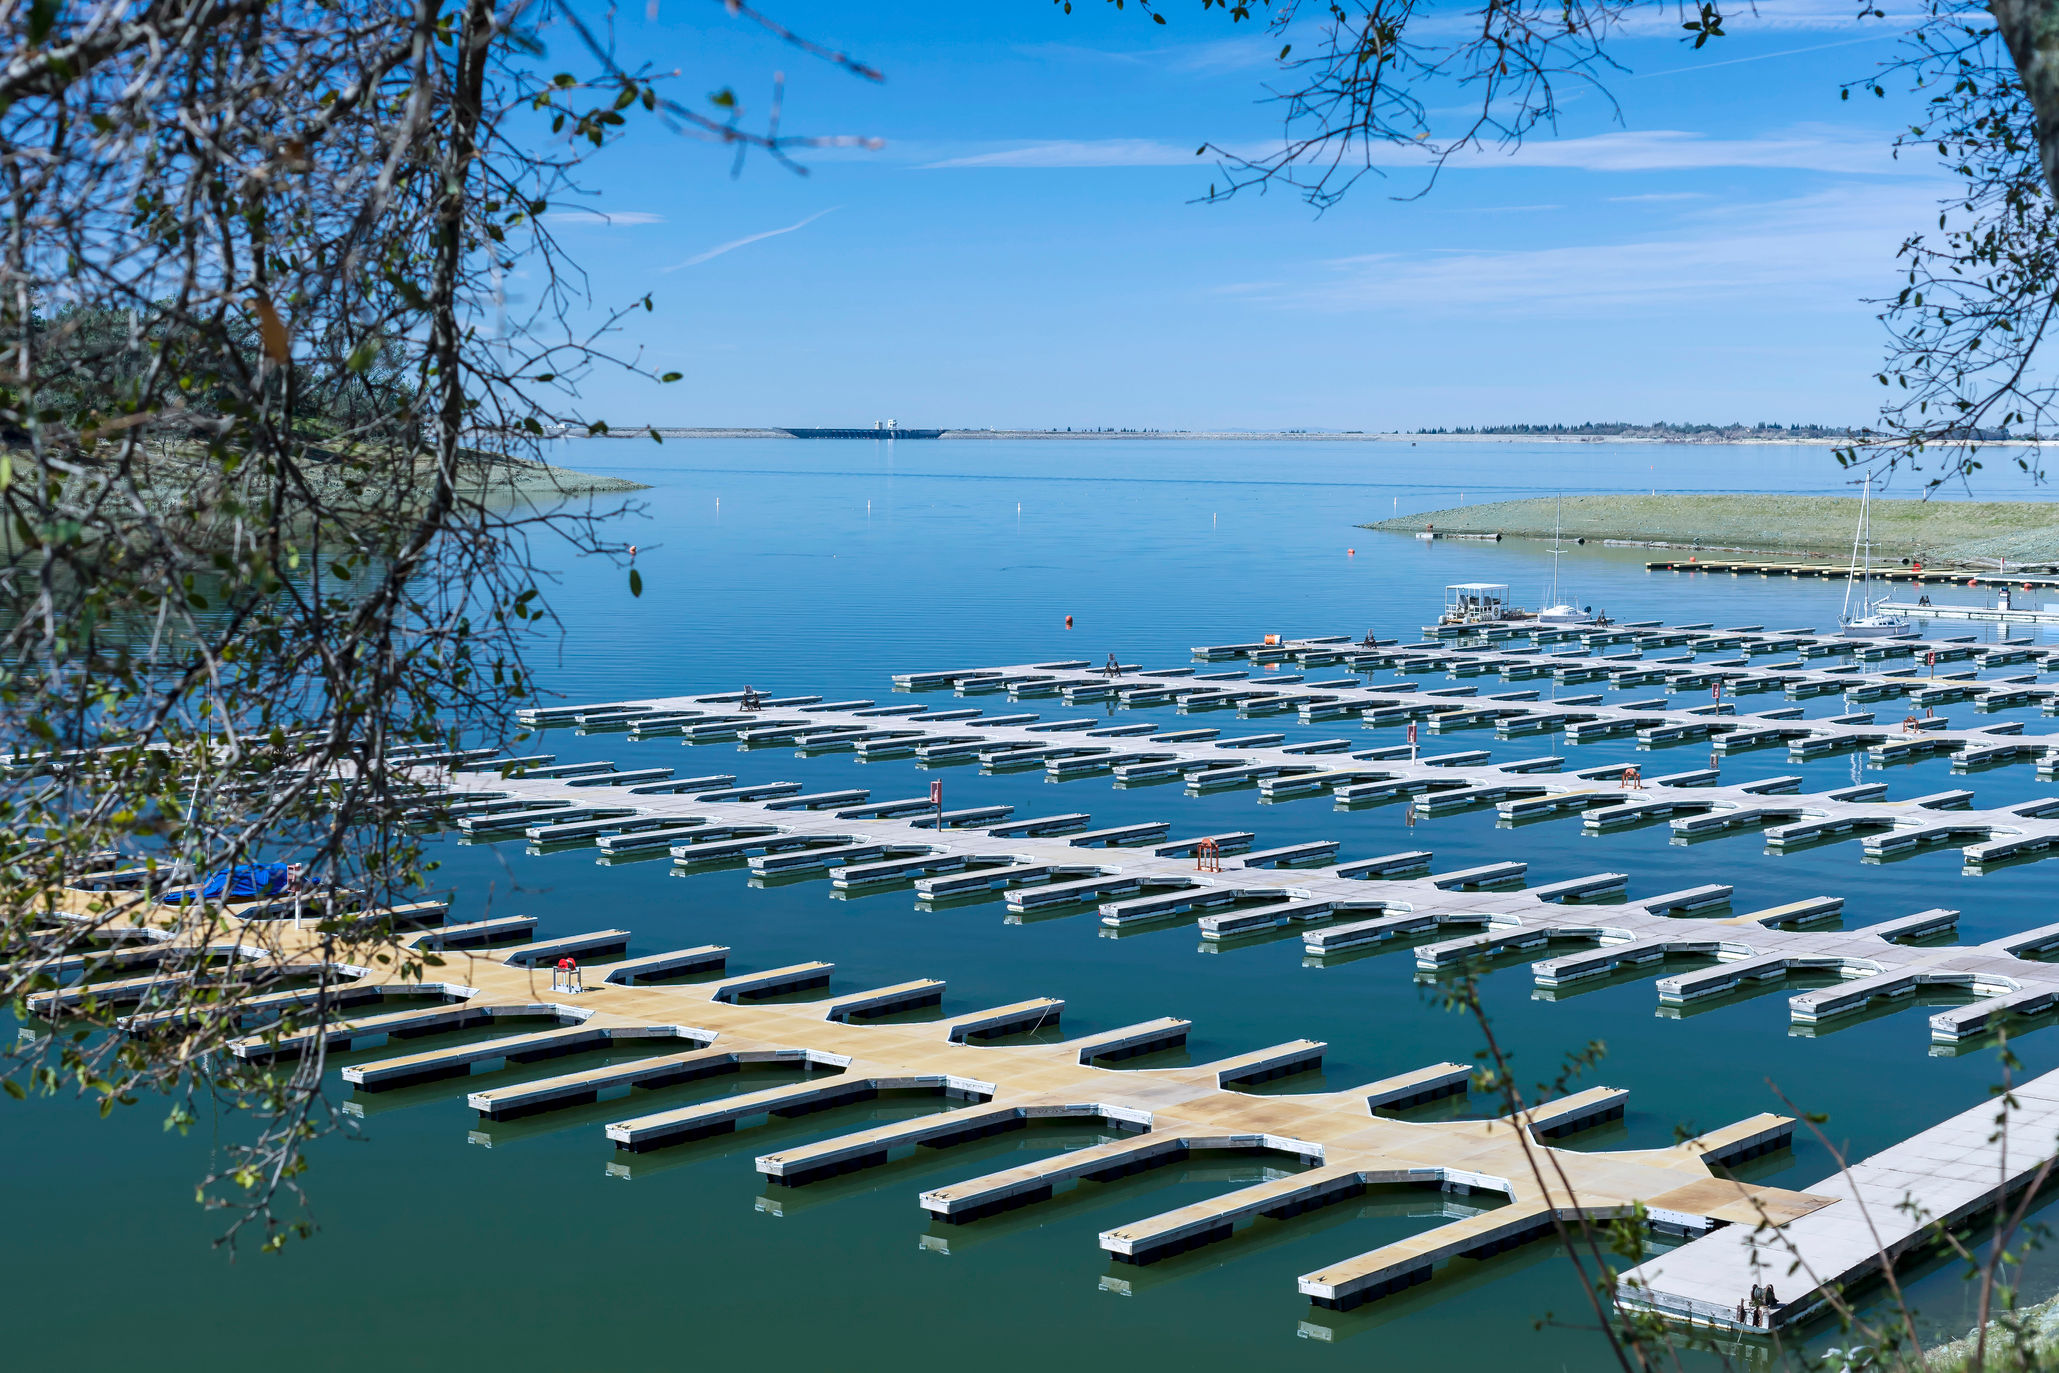 Six rows of empty docks on a calm lake.